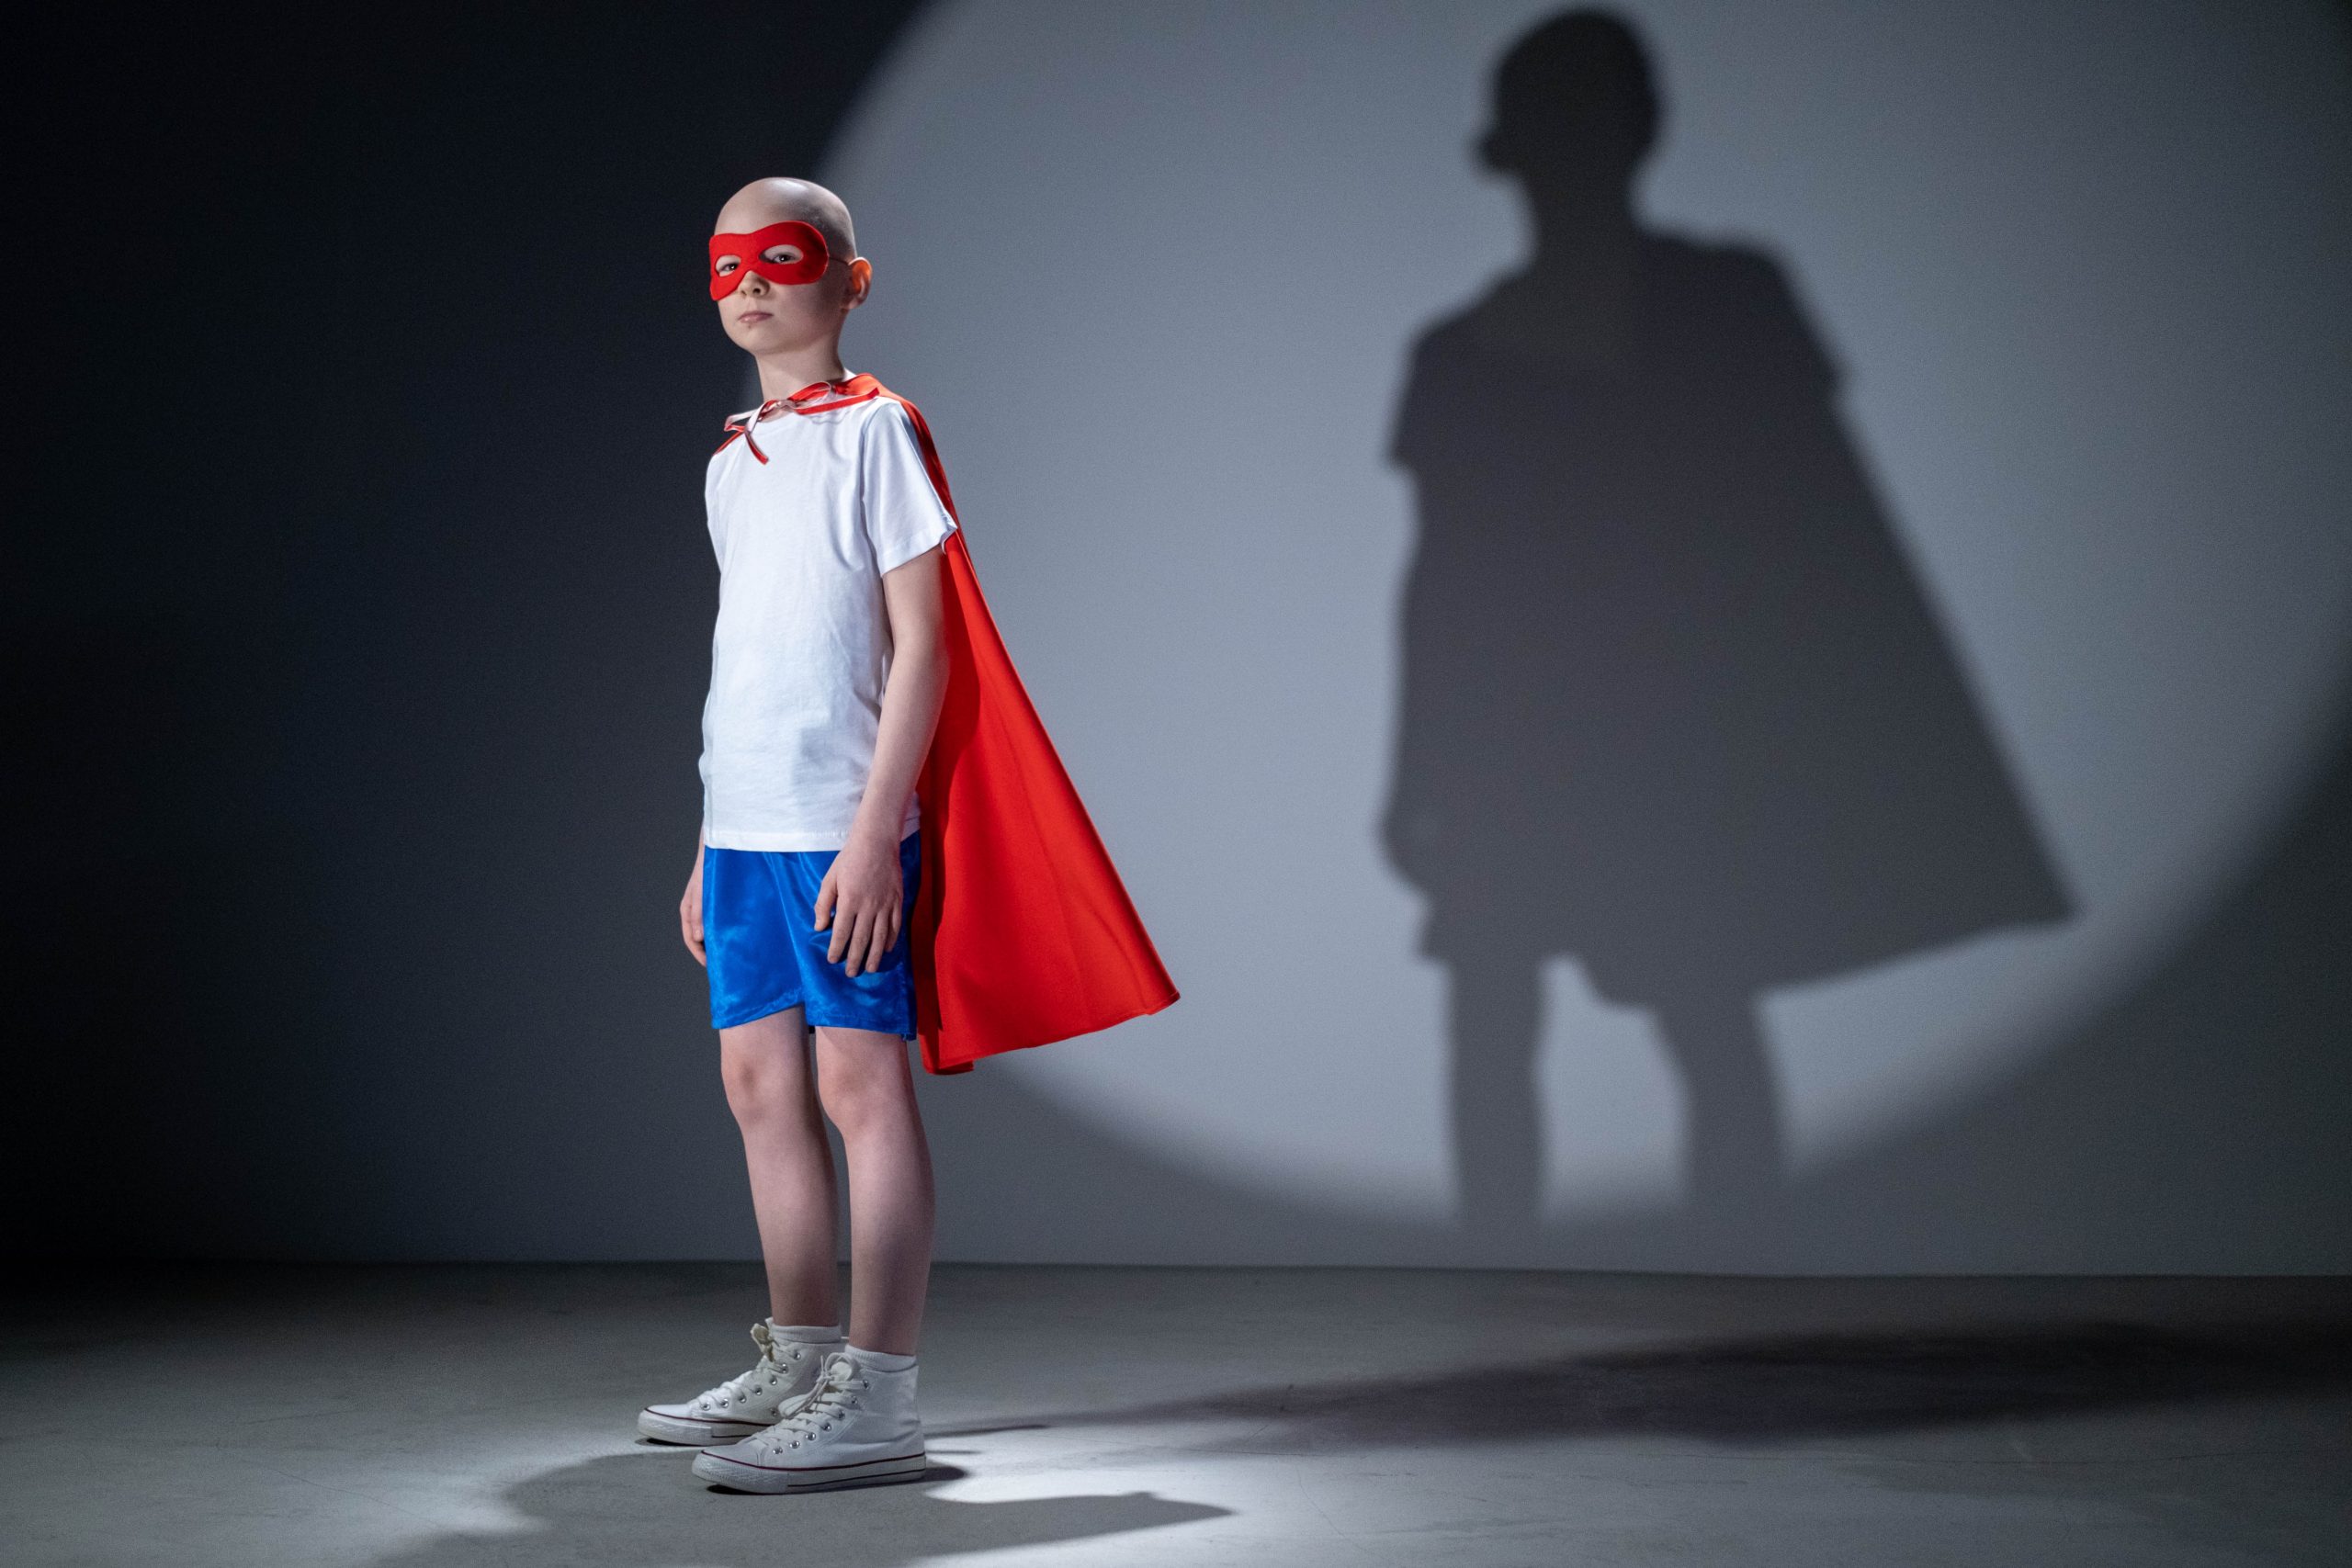 A young child wearing a super-hero cape and amsk, standing in front of a wall with a light projecting a shadow behind them